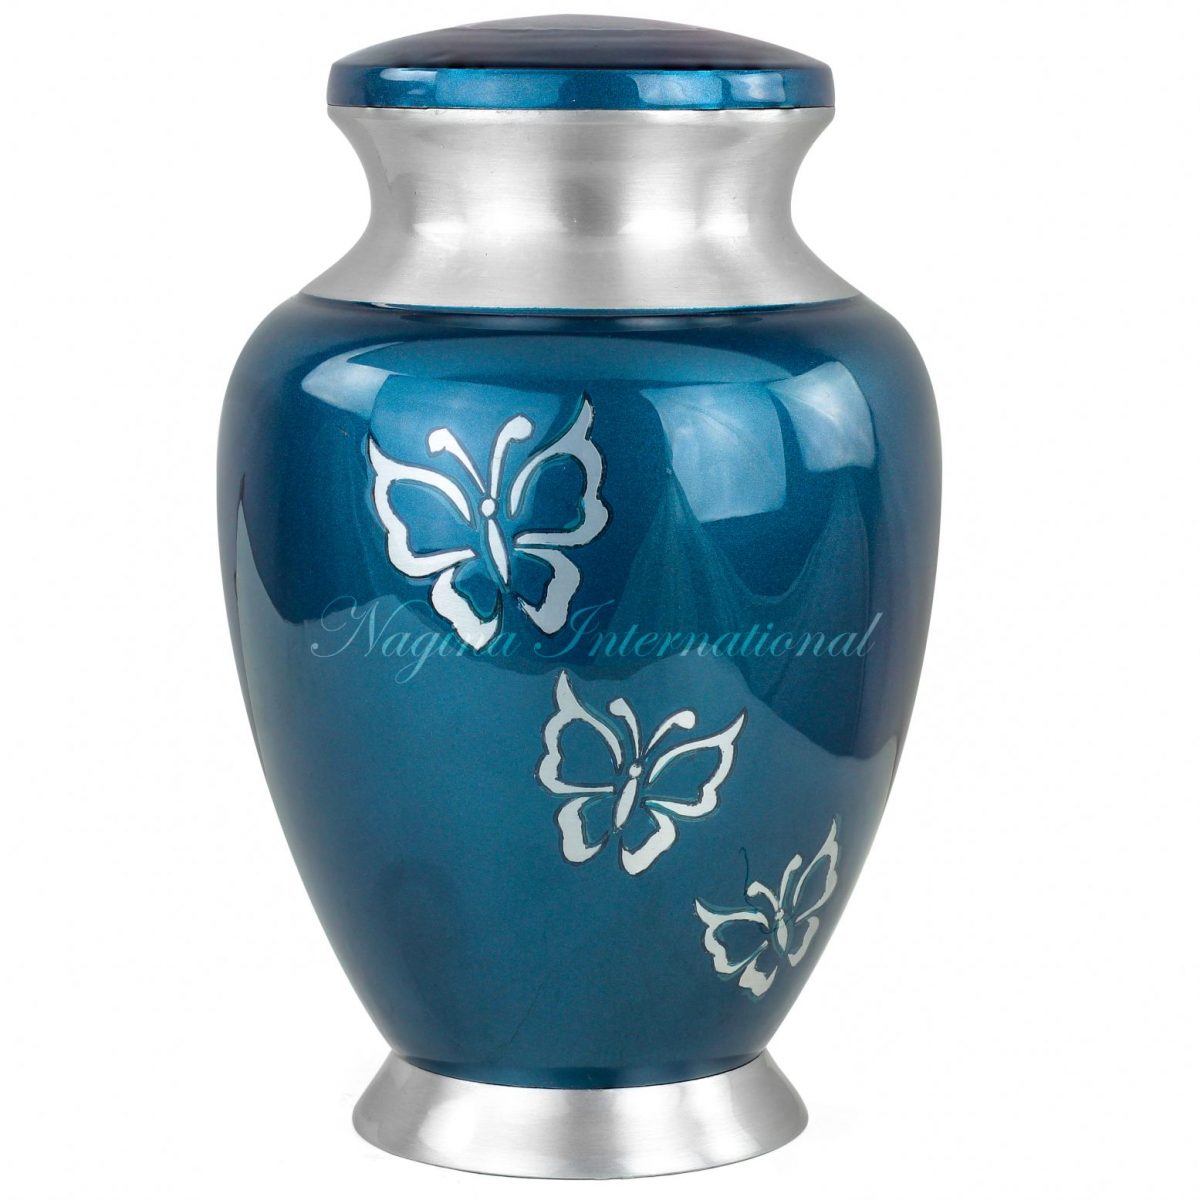 10" Medium Size Funerary Urns For Cremation Remains | Ash Storage Jar | Funerary Aluminum Urns For Pet Loss |Beautiful Home Decor | Sympathy Gifts Ideas For Grieving Friends (Teal Blue)